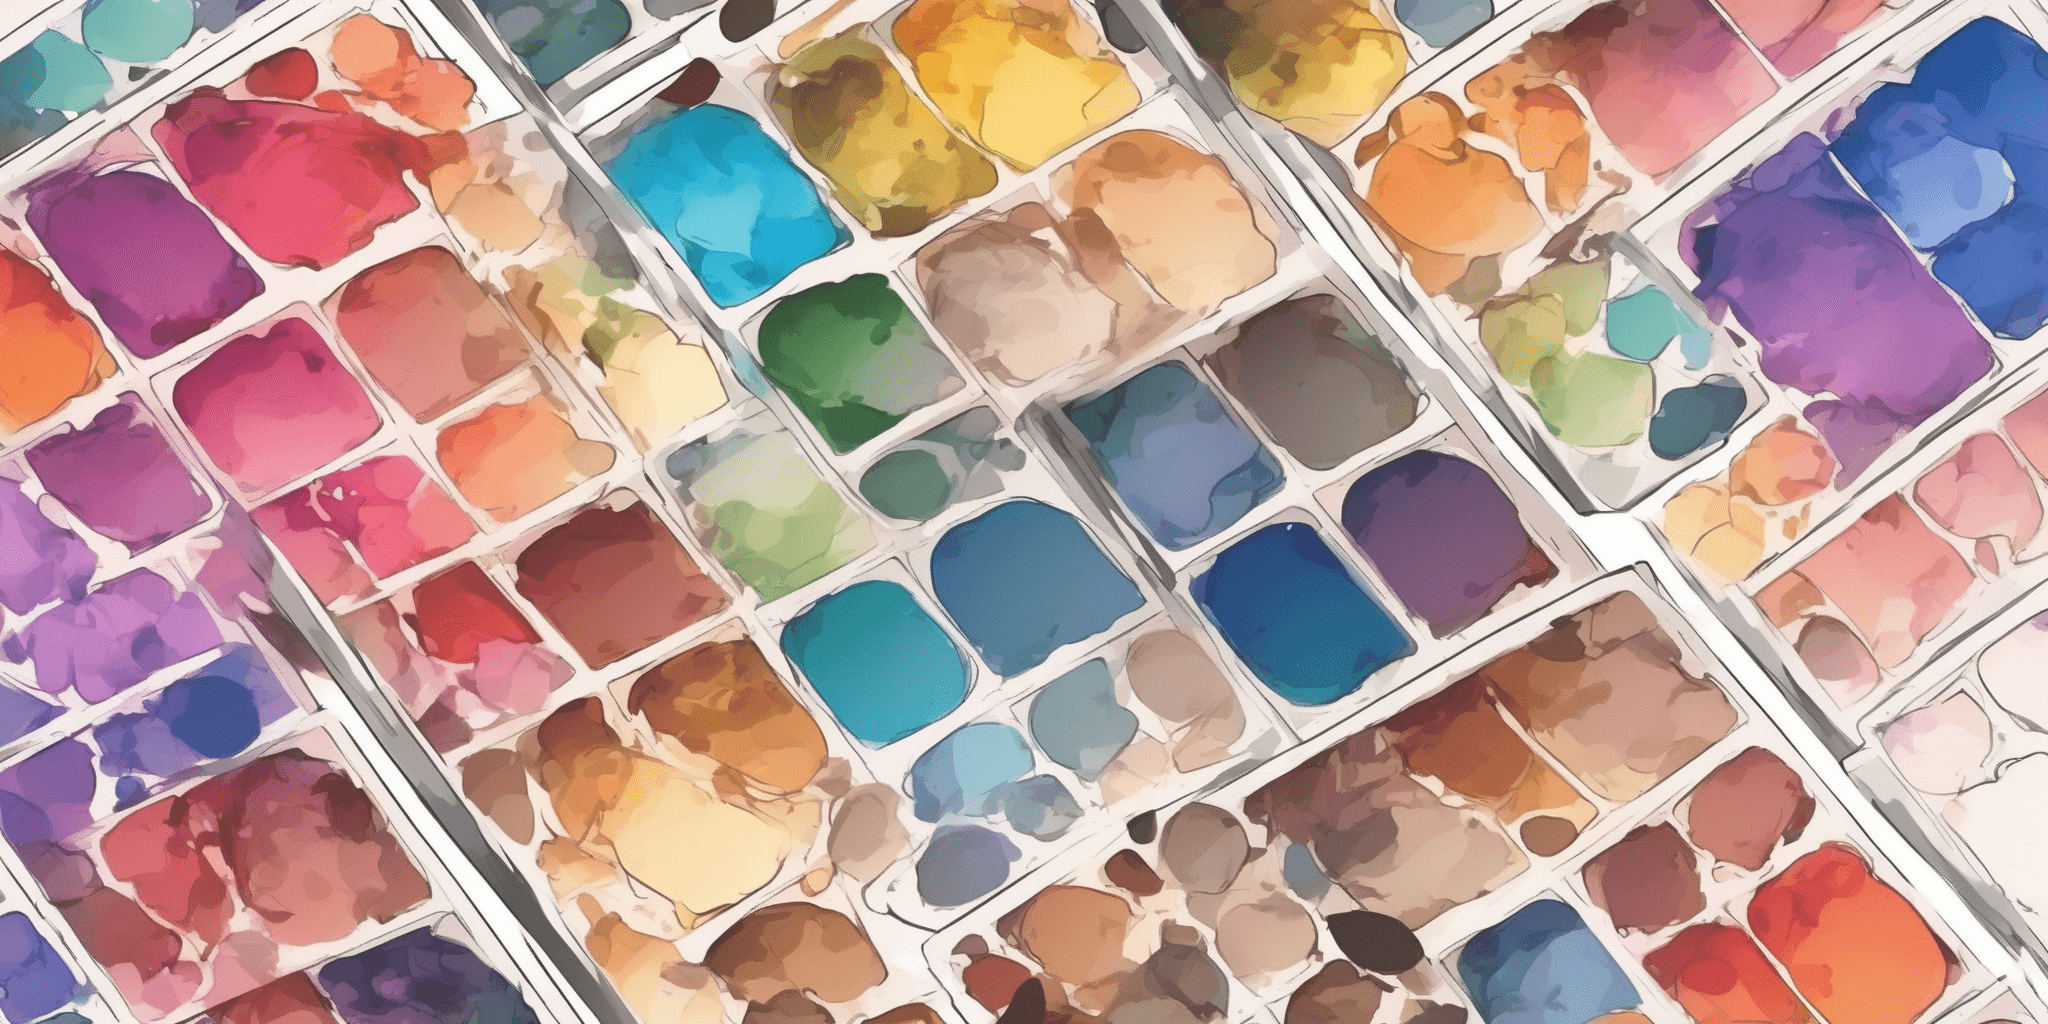 Artist's palette in illustration style with gradients and white background